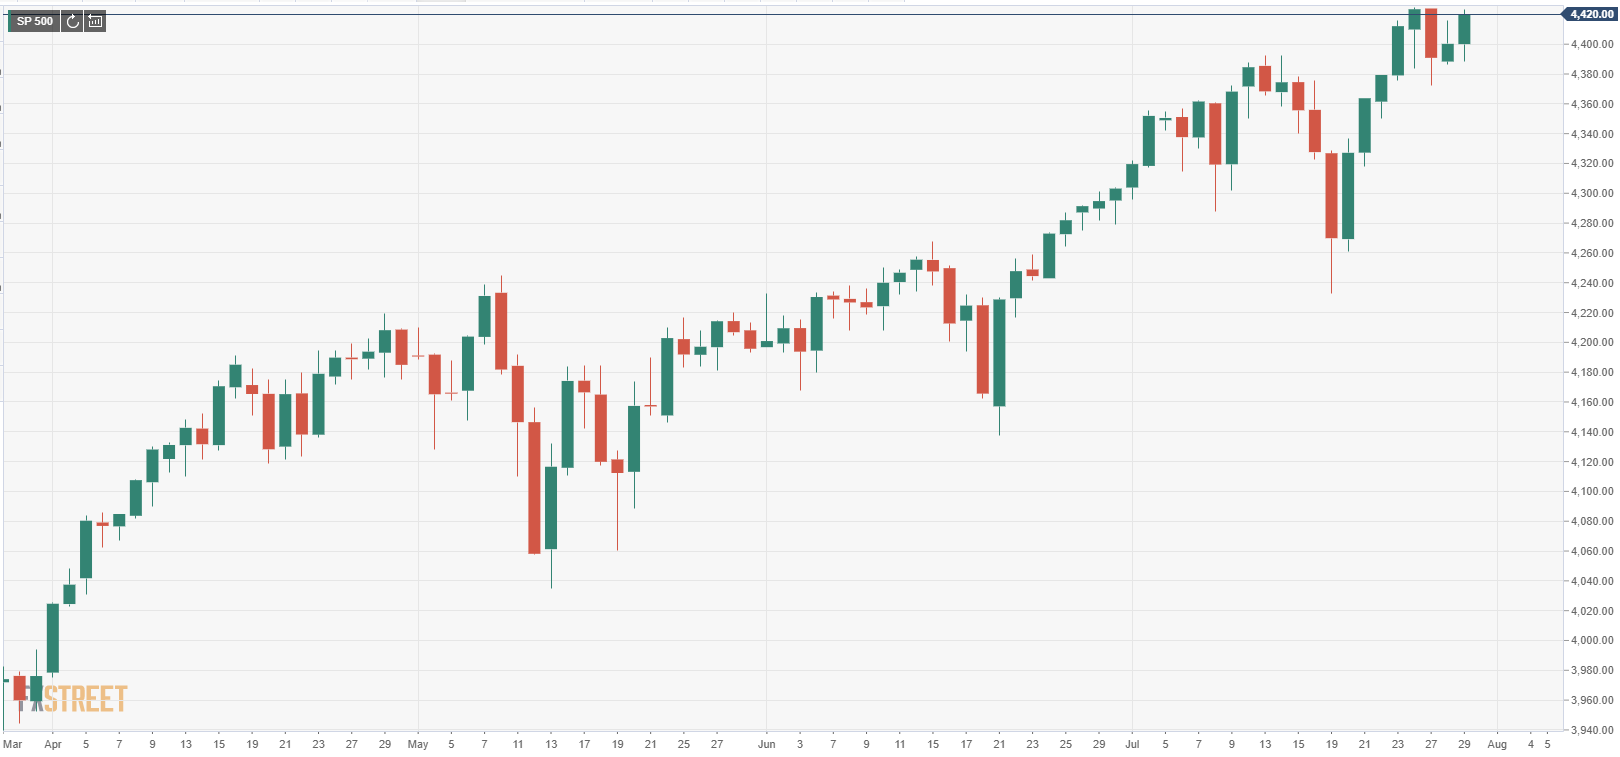 The S&P 500 Index opens higher despite dismal US data.